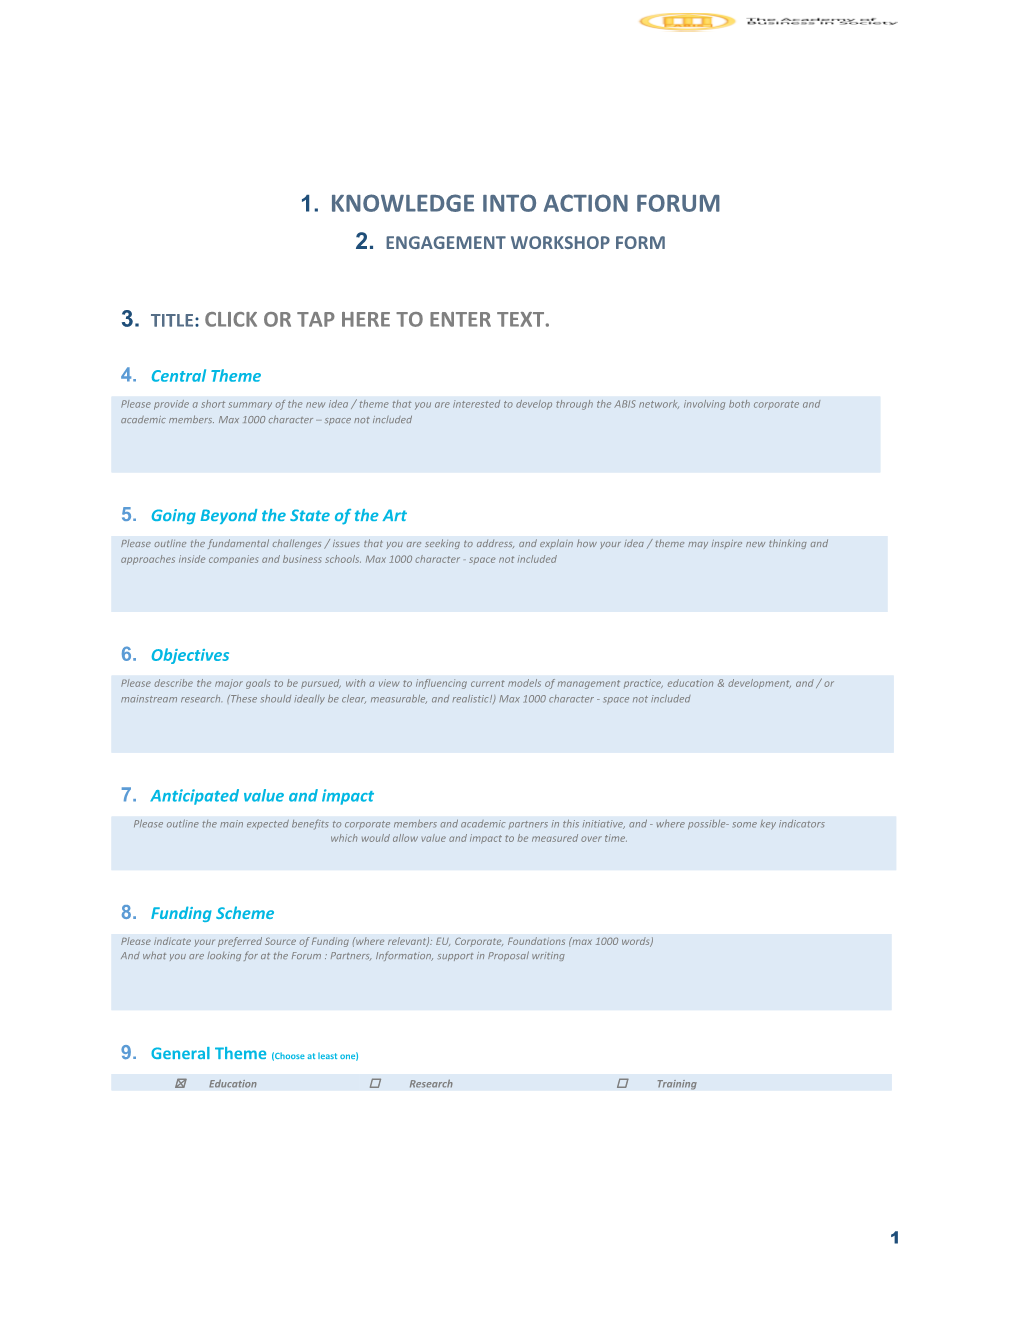 Knowledge Into Action Forum